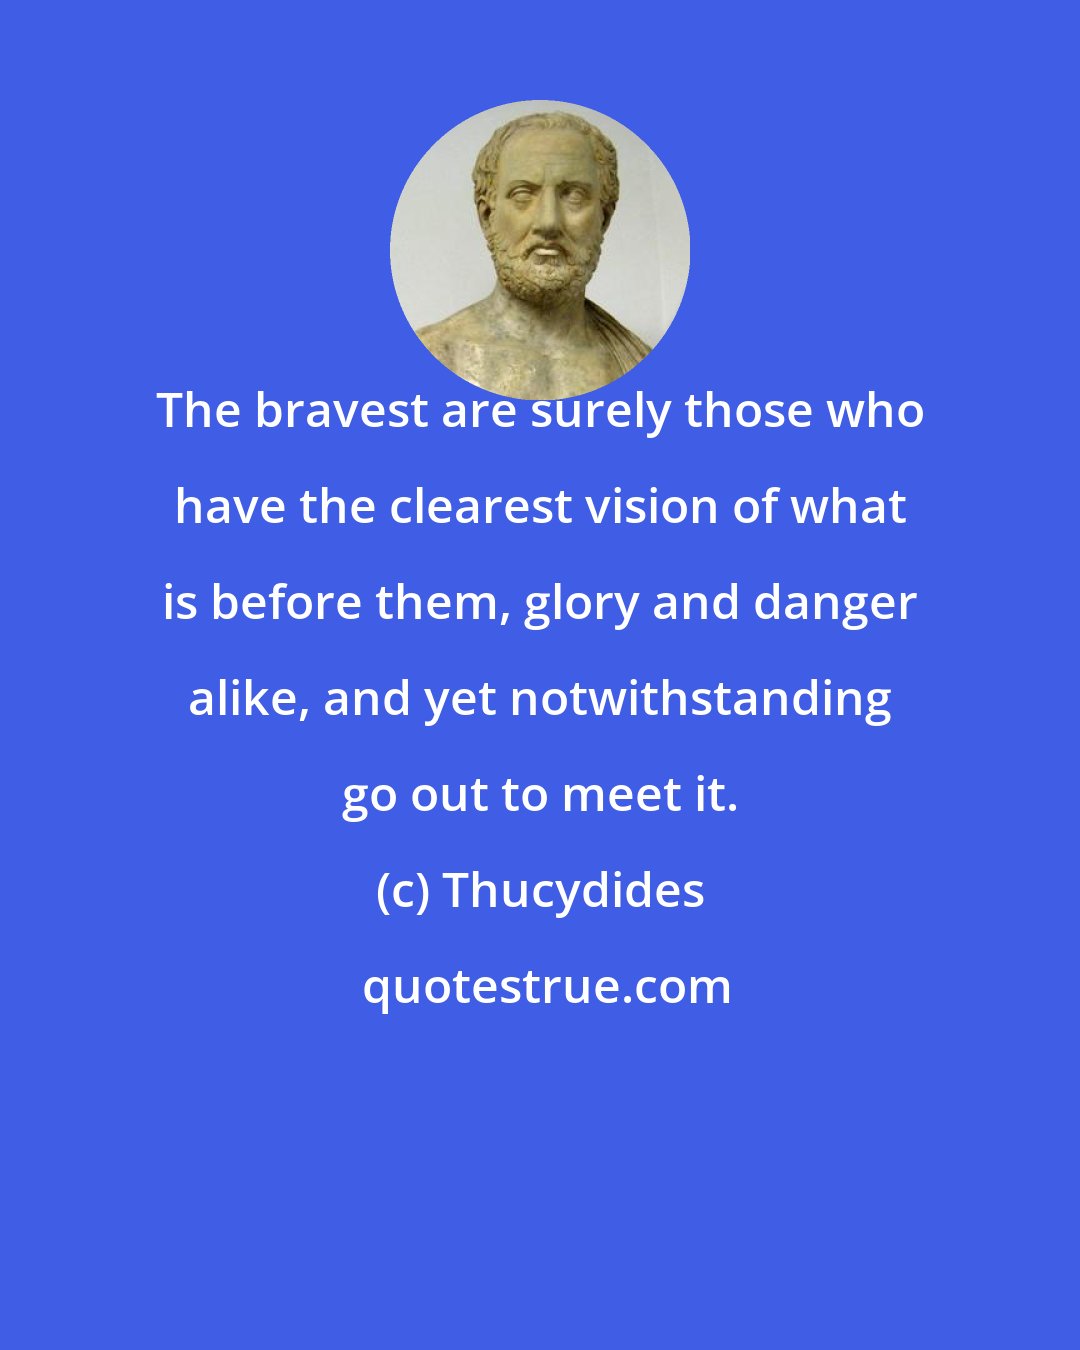 Thucydides: The bravest are surely those who have the clearest vision of what is before them, glory and danger alike, and yet notwithstanding go out to meet it.